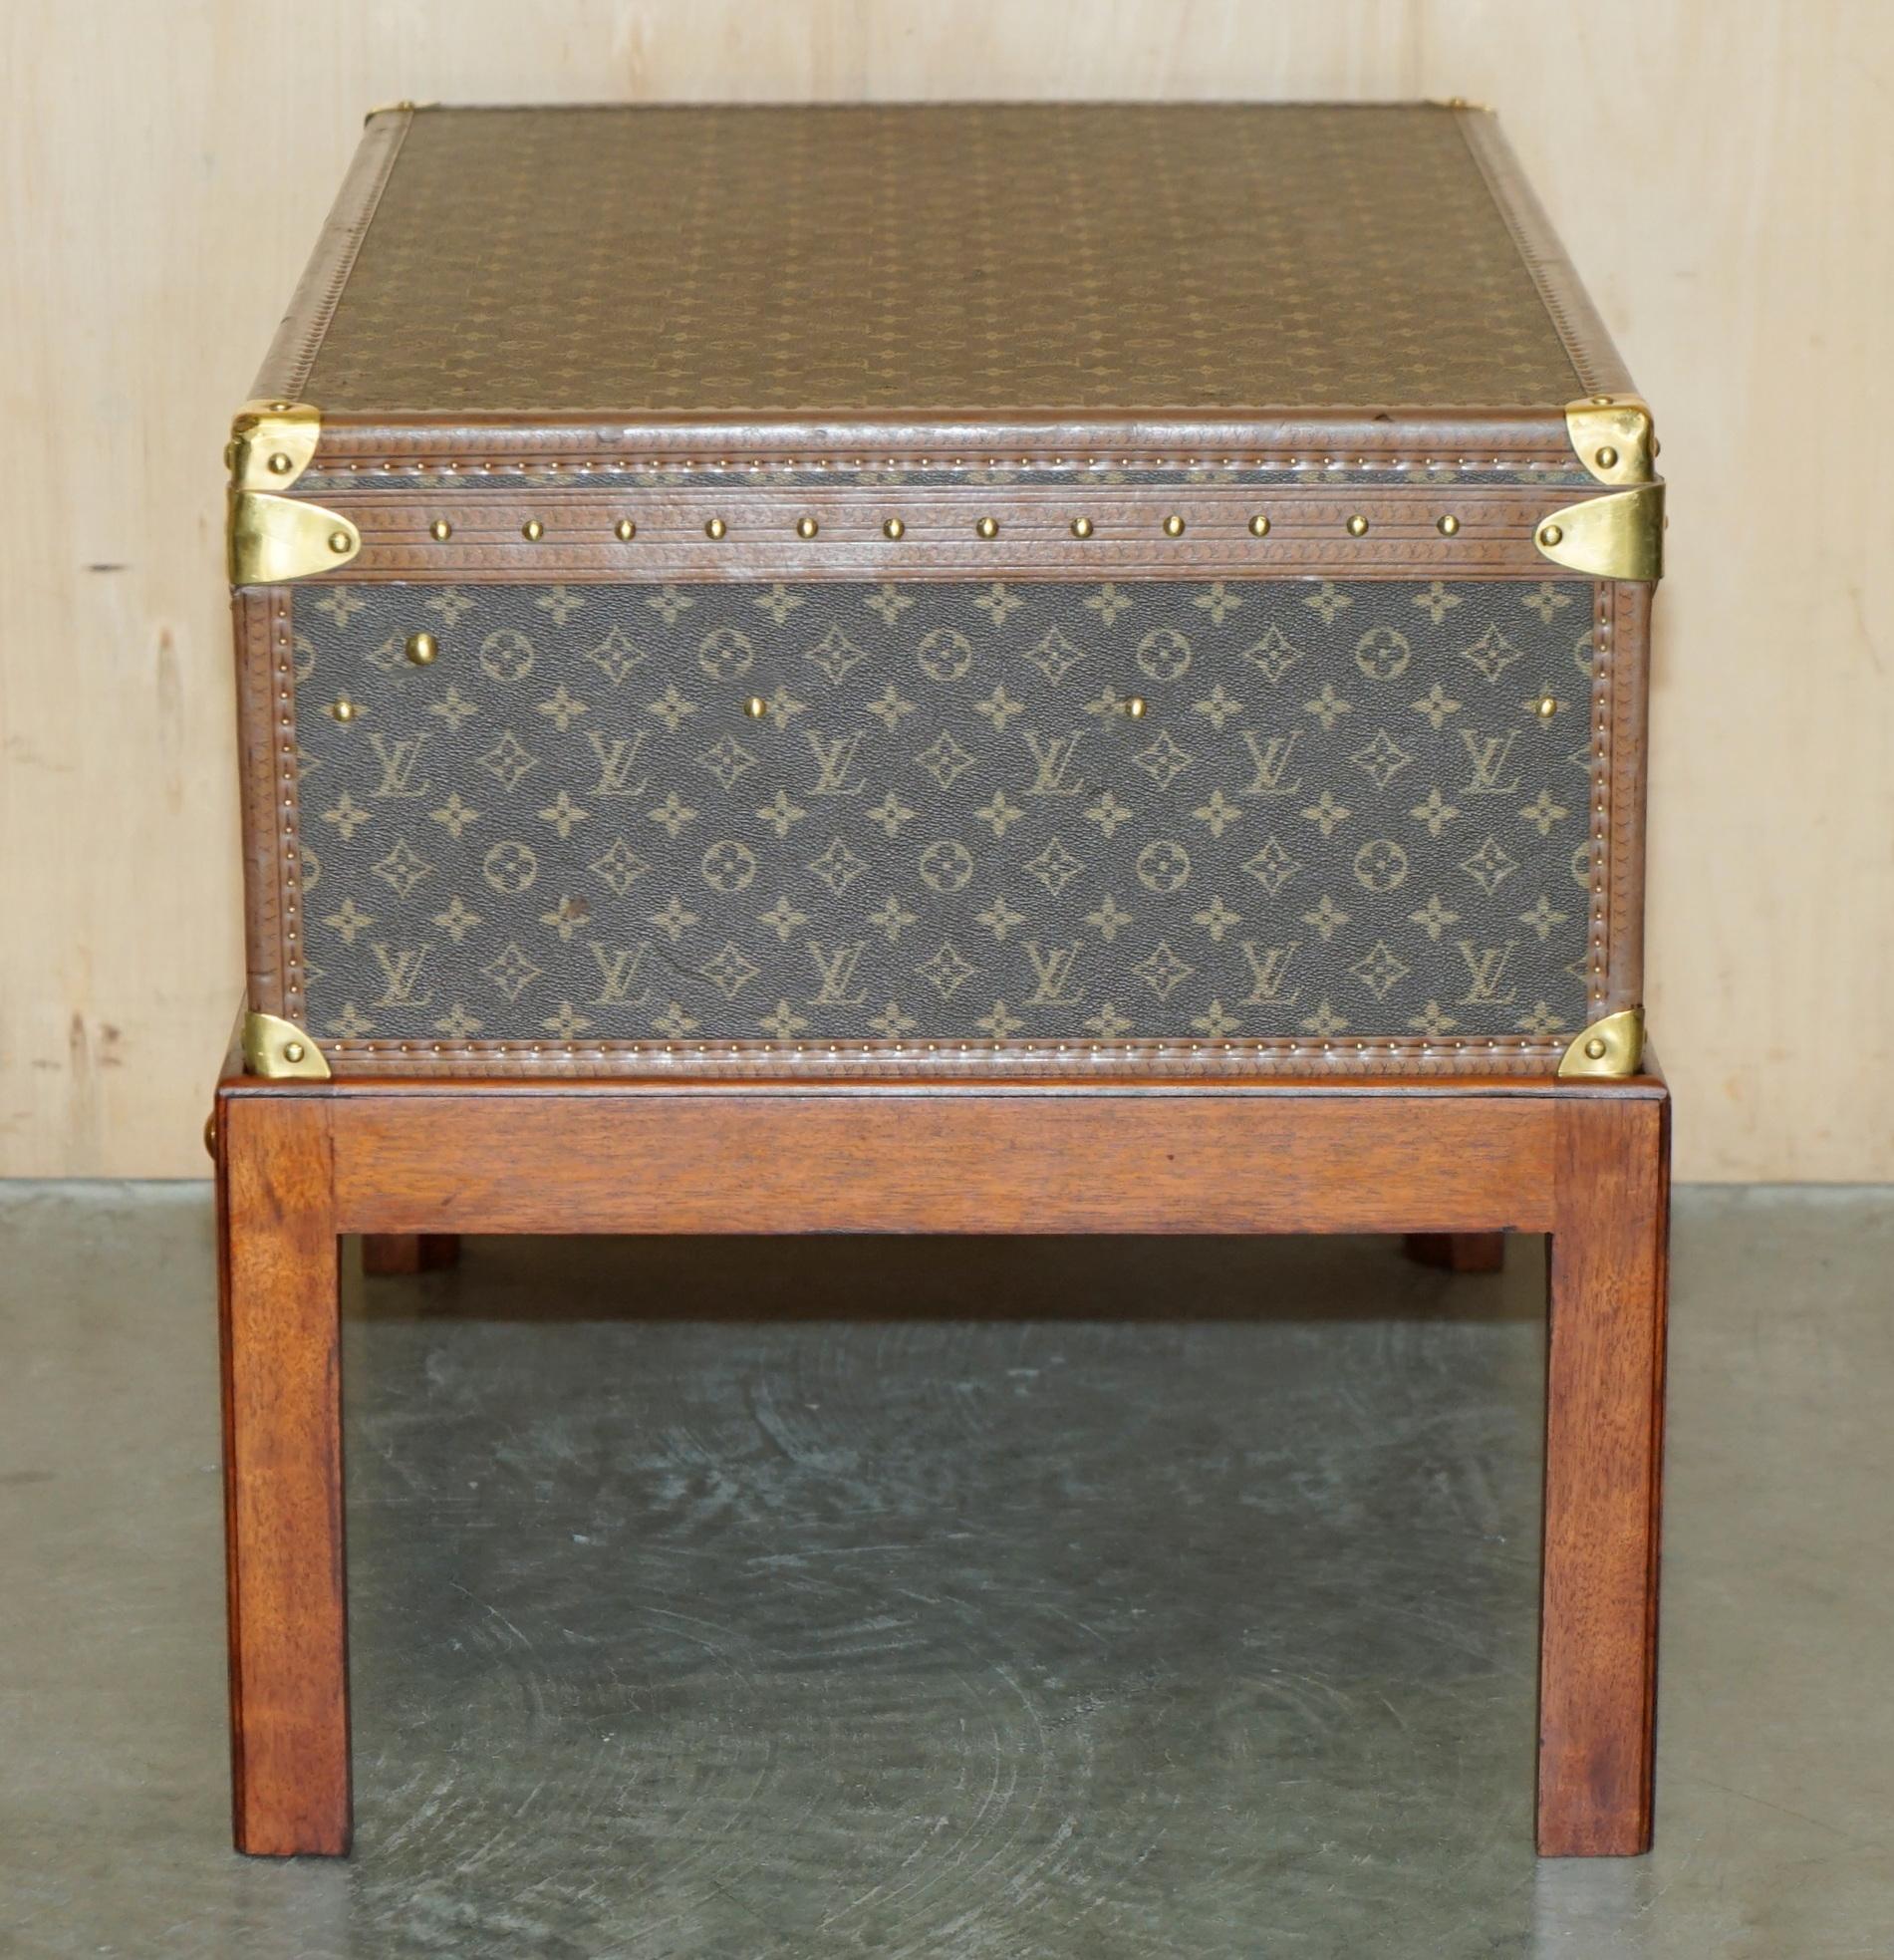 FULLY RESTORED ViNTAGE BROWN LEATHER LOUIS VUITTON SUITCASE TRUNK COFFEE TABLE 6